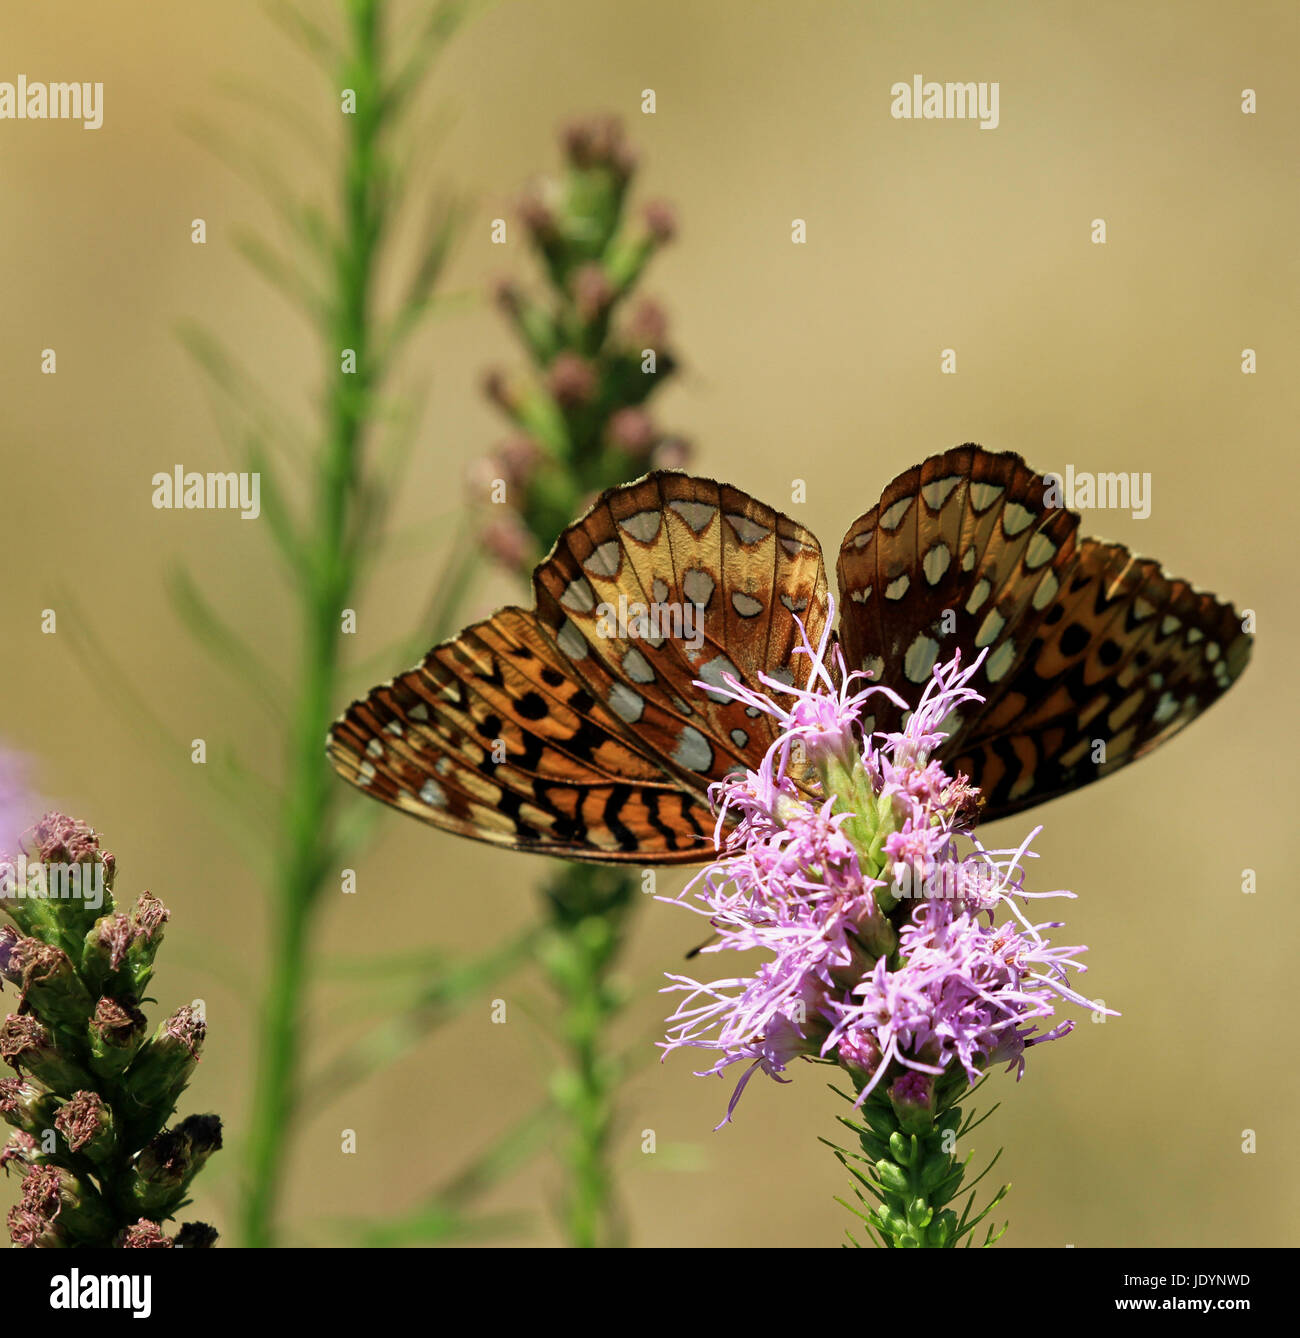 A Great Spangled Fritillary Butterfly (Speyeria cybele) pollinating blazing star (Liatris spicata) in a New England perennial garden Stock Photo